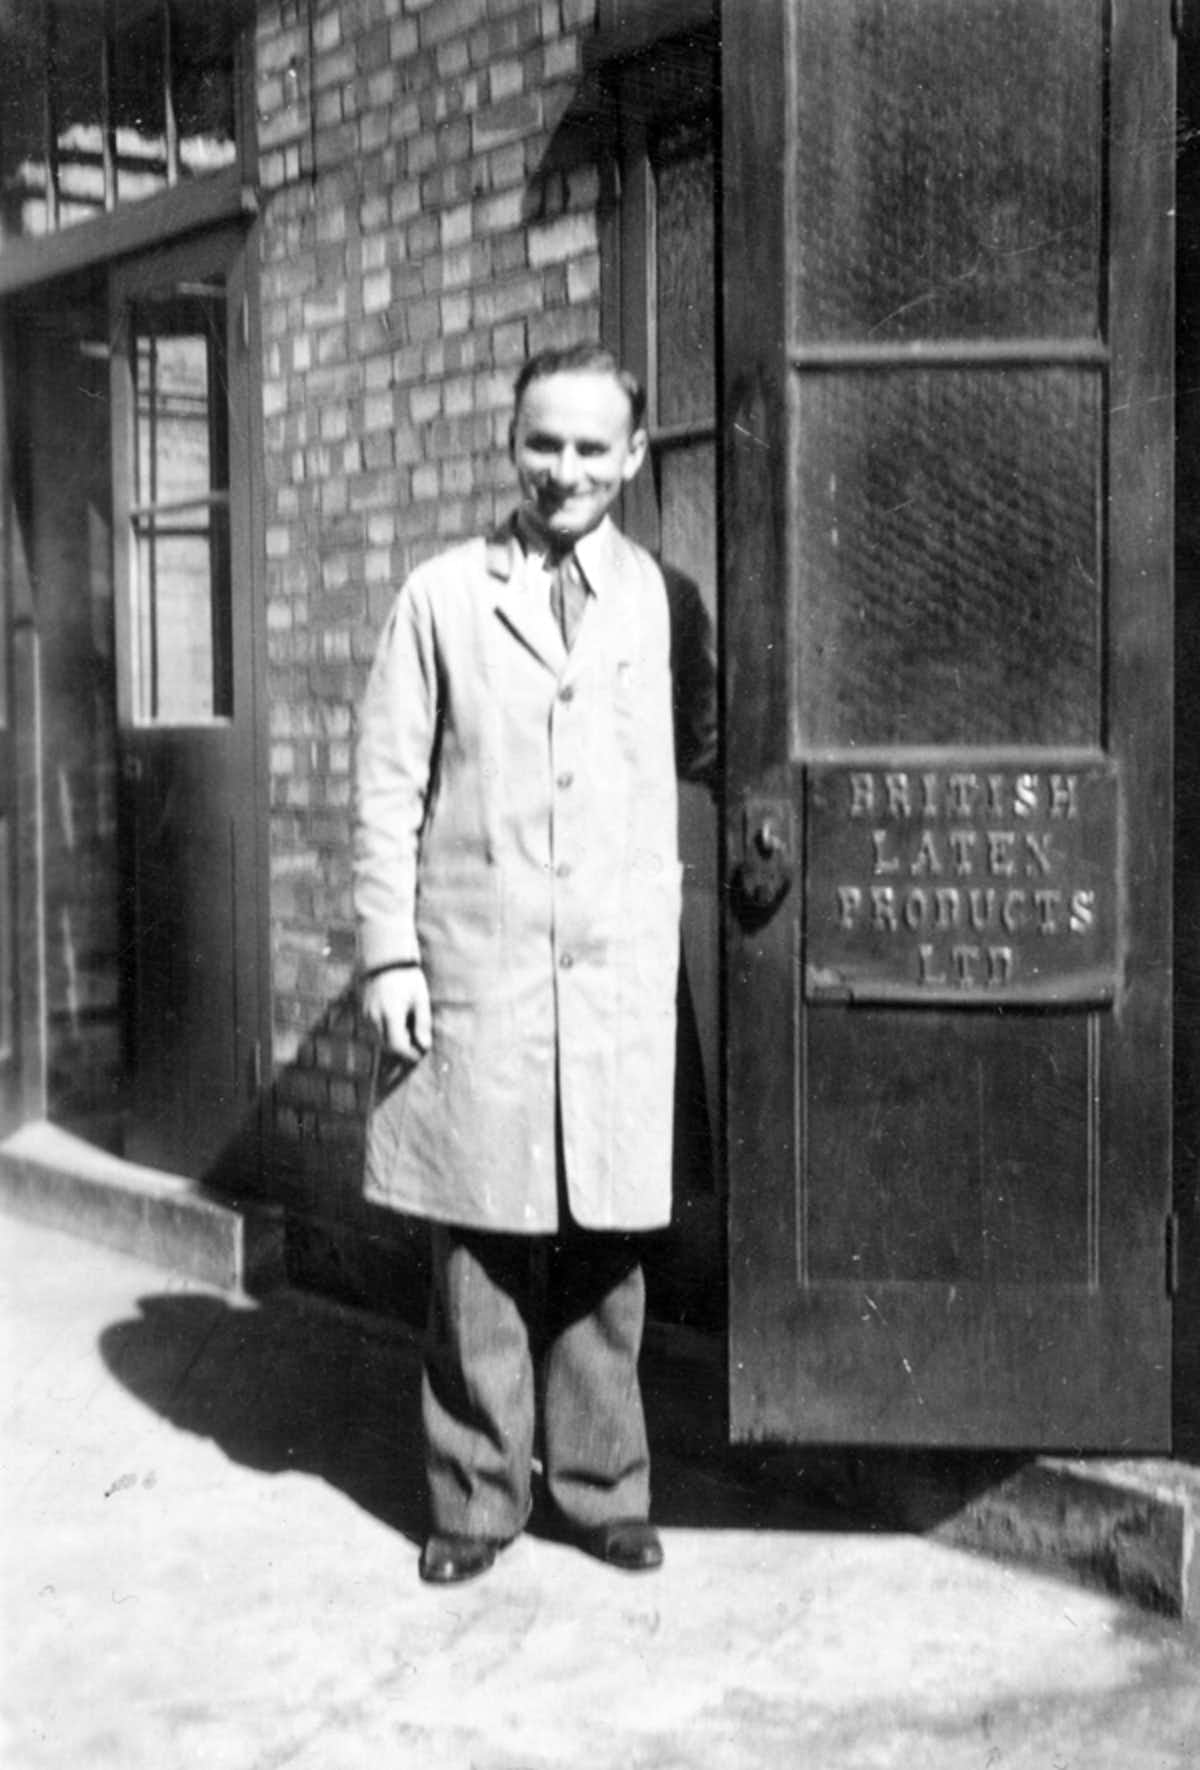 Lucian Landau, the inventor of Durex condoms, at the entrance to British Latex Products, 1932